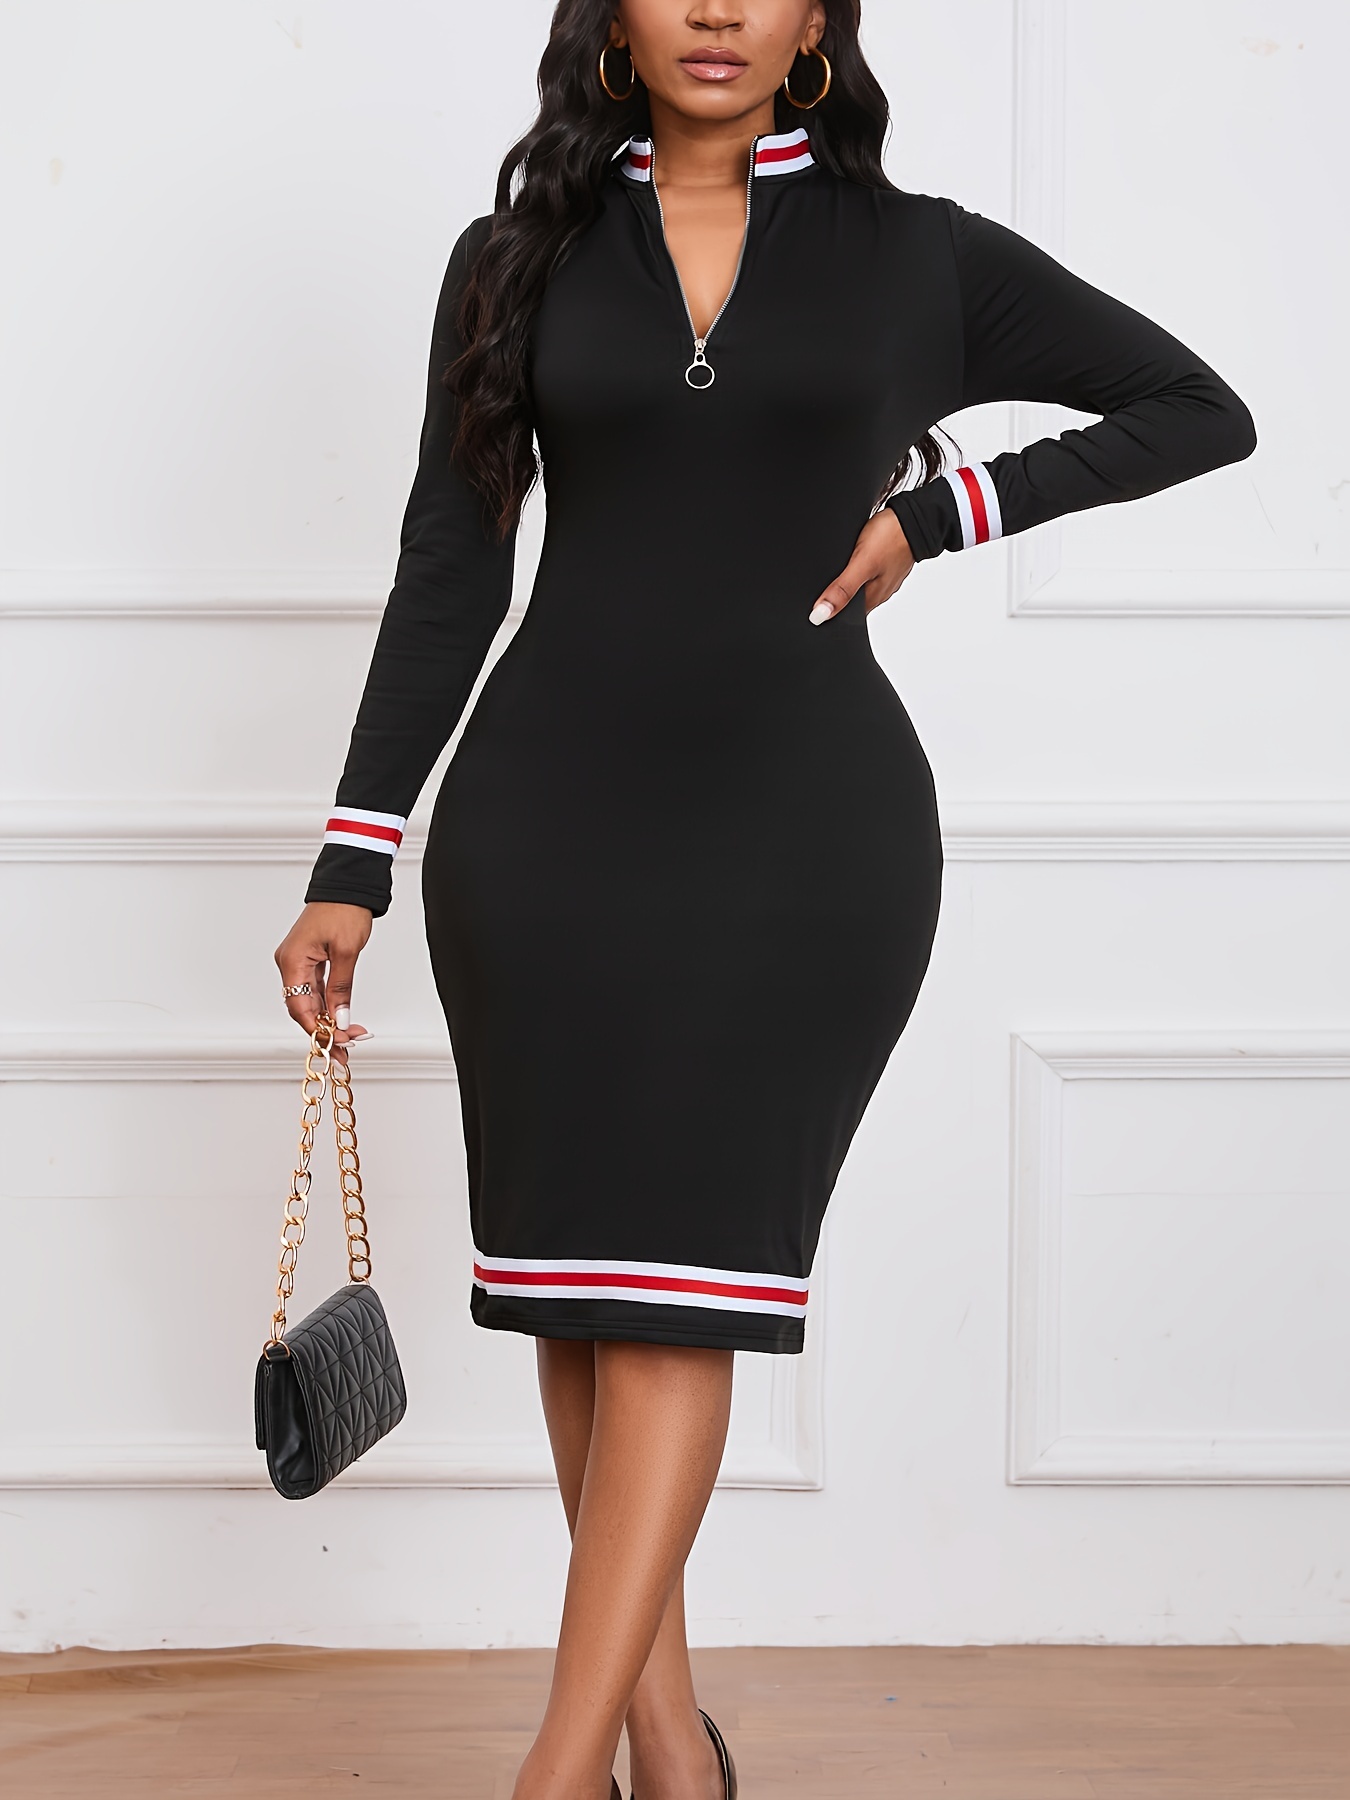 zip up striped print dress casual long sleeve bodycon midi dress womens clothing details 30